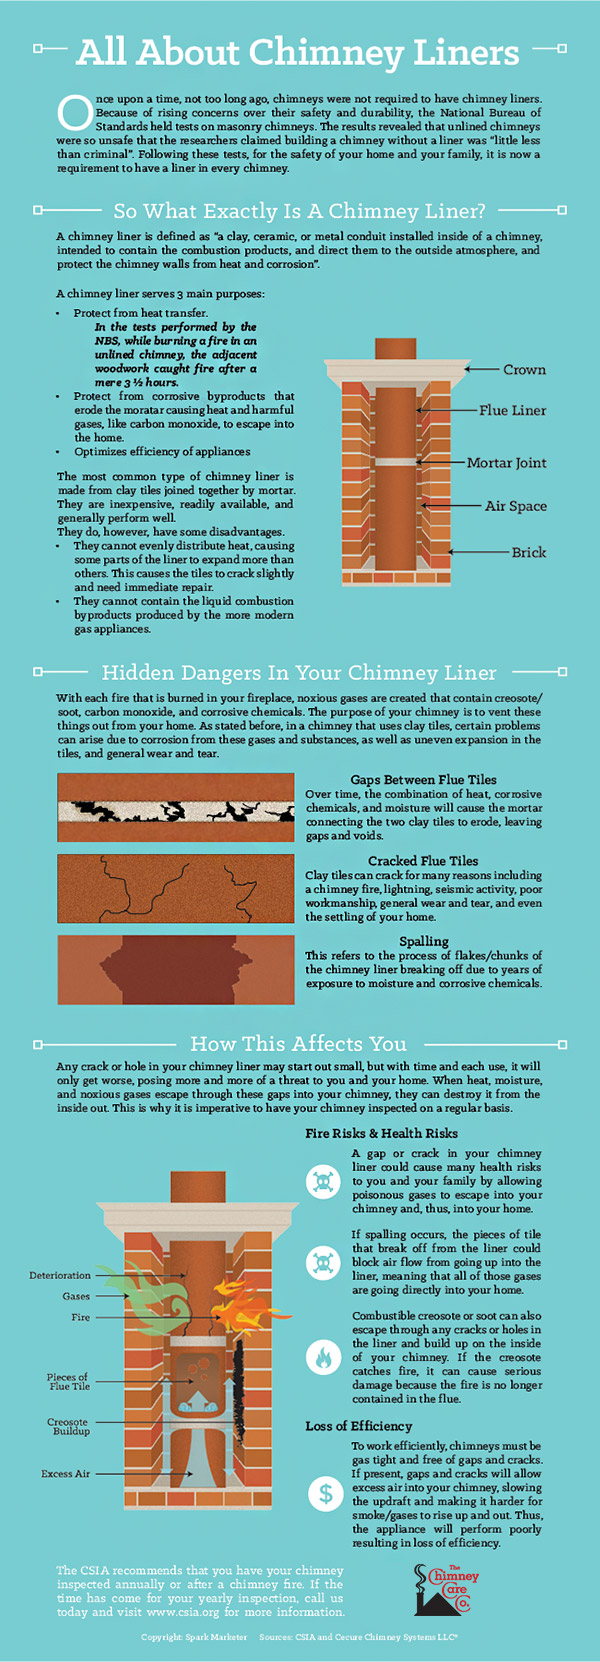 All-About-Chimney-Liners-Cincinnati-OH-Chimney-Care-Co